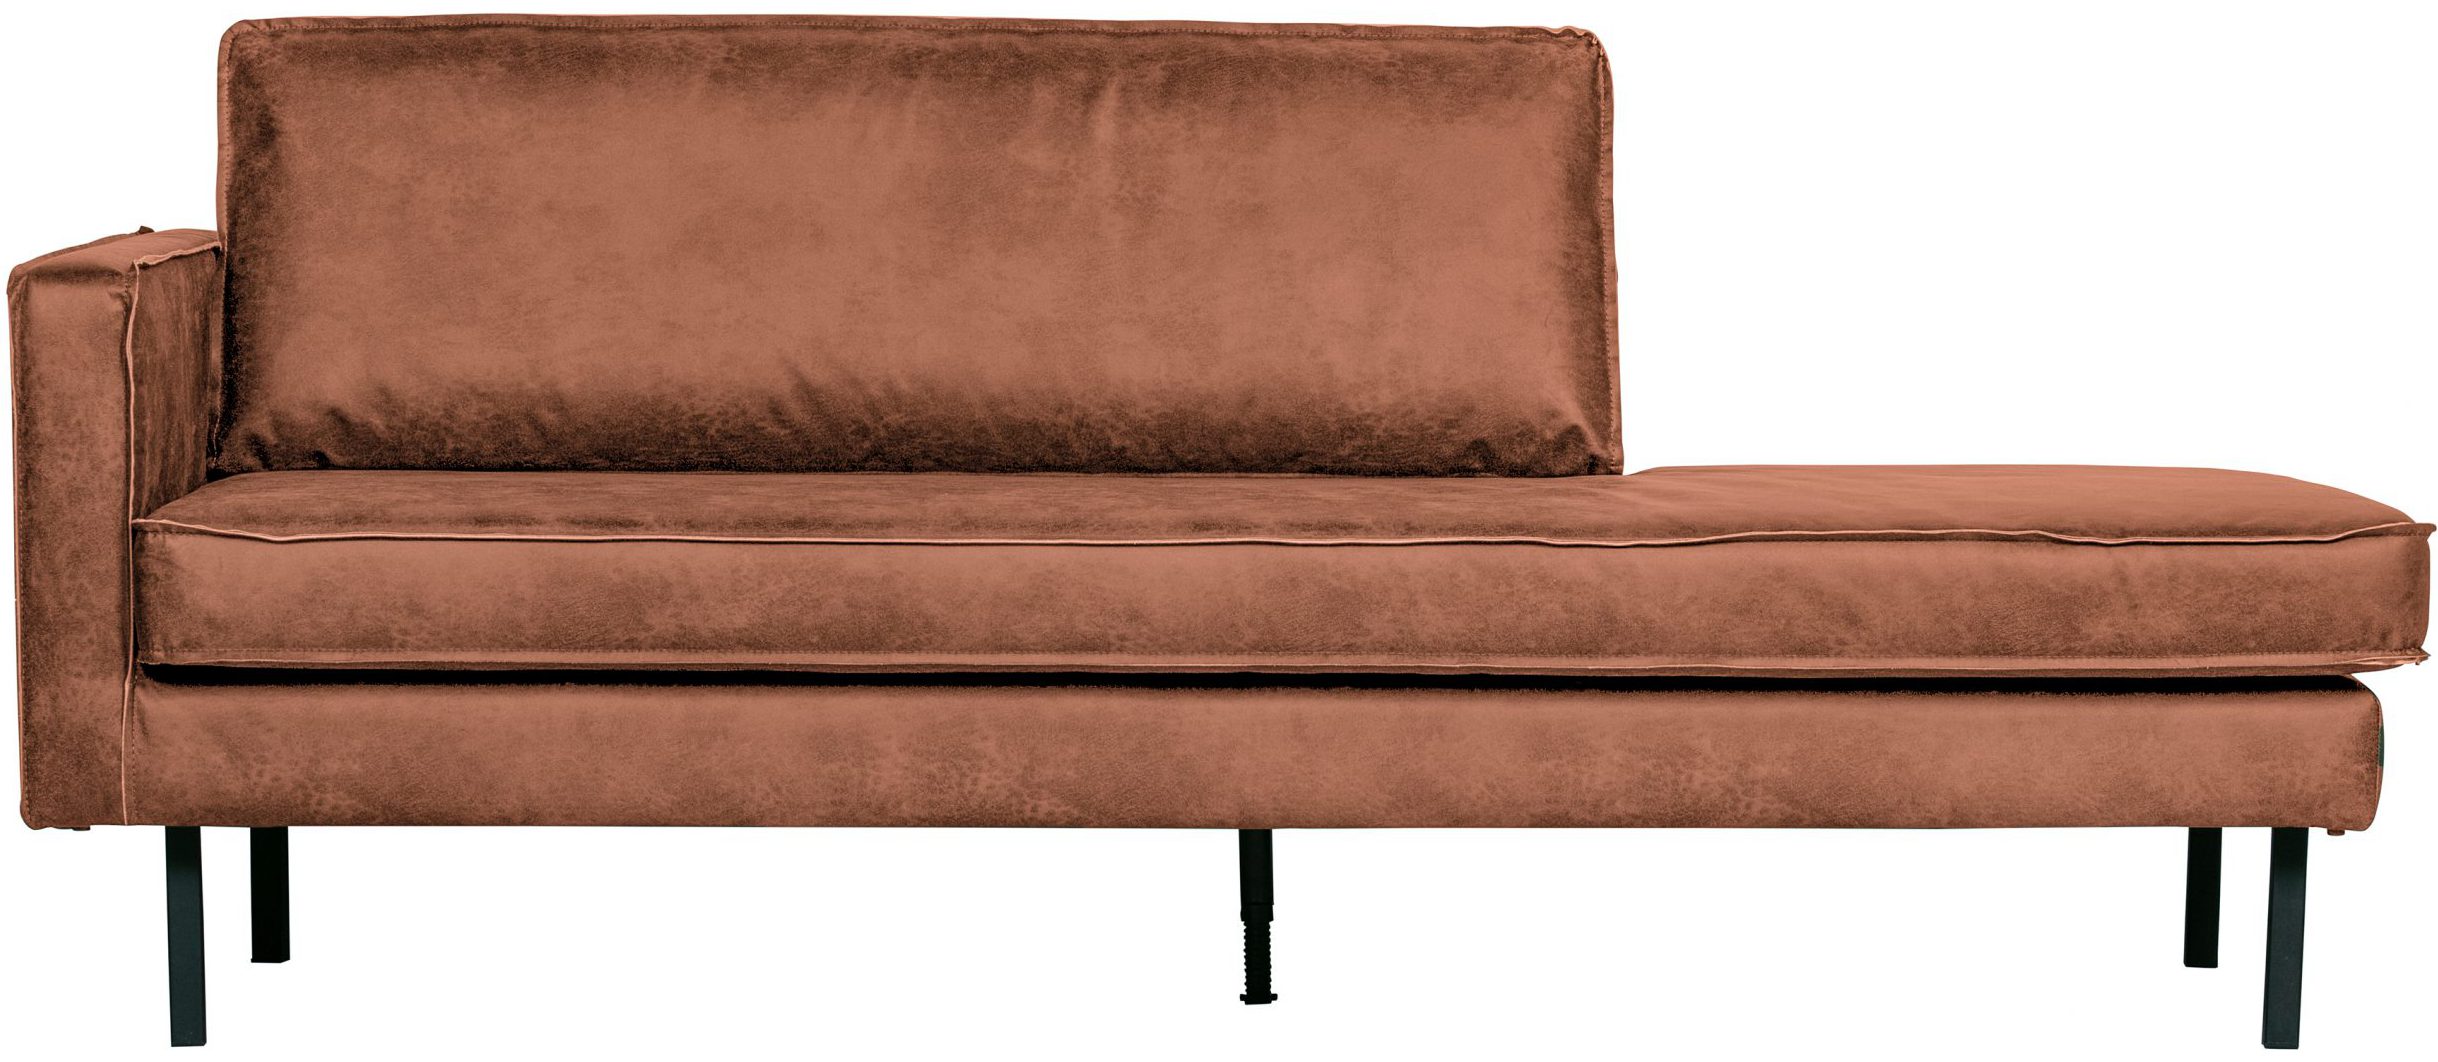 Rodeo Daybed Left - Cognac